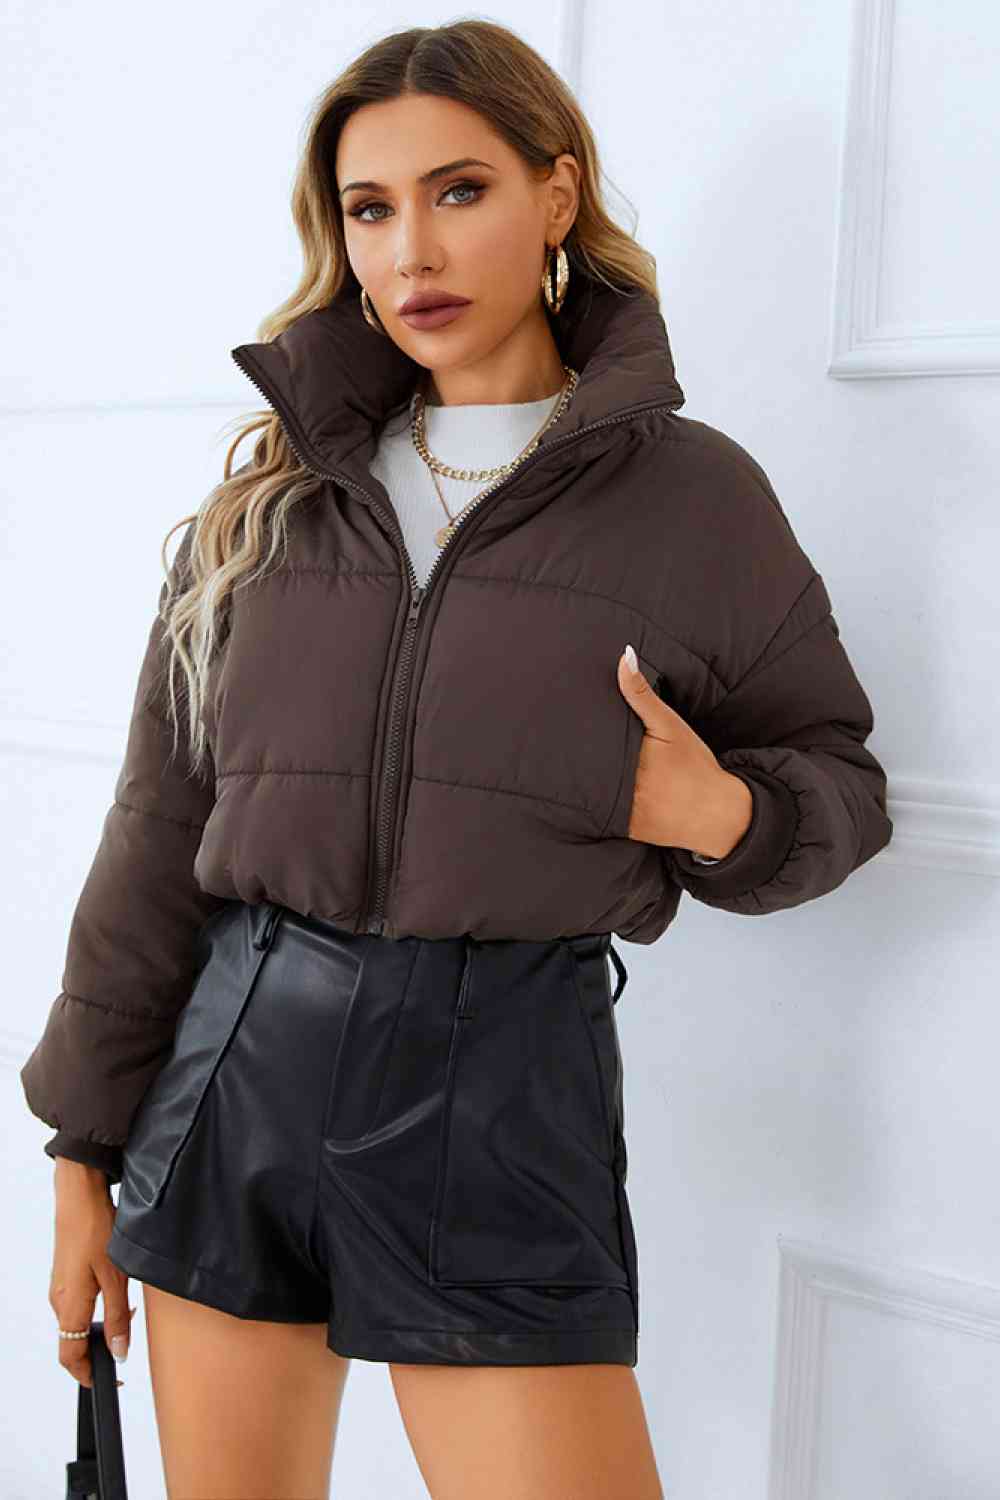 a warm and stylish winter coat in a rich, deep shade of navy blue. The coat features a faux fur-lined hood, zippered front, and ample pockets for added convenience. Perfect for staying cozy and fashionable during the cold winter months.A winter coat designed for warmth and functionality, featuring multiple spacious pockets for added convenience.